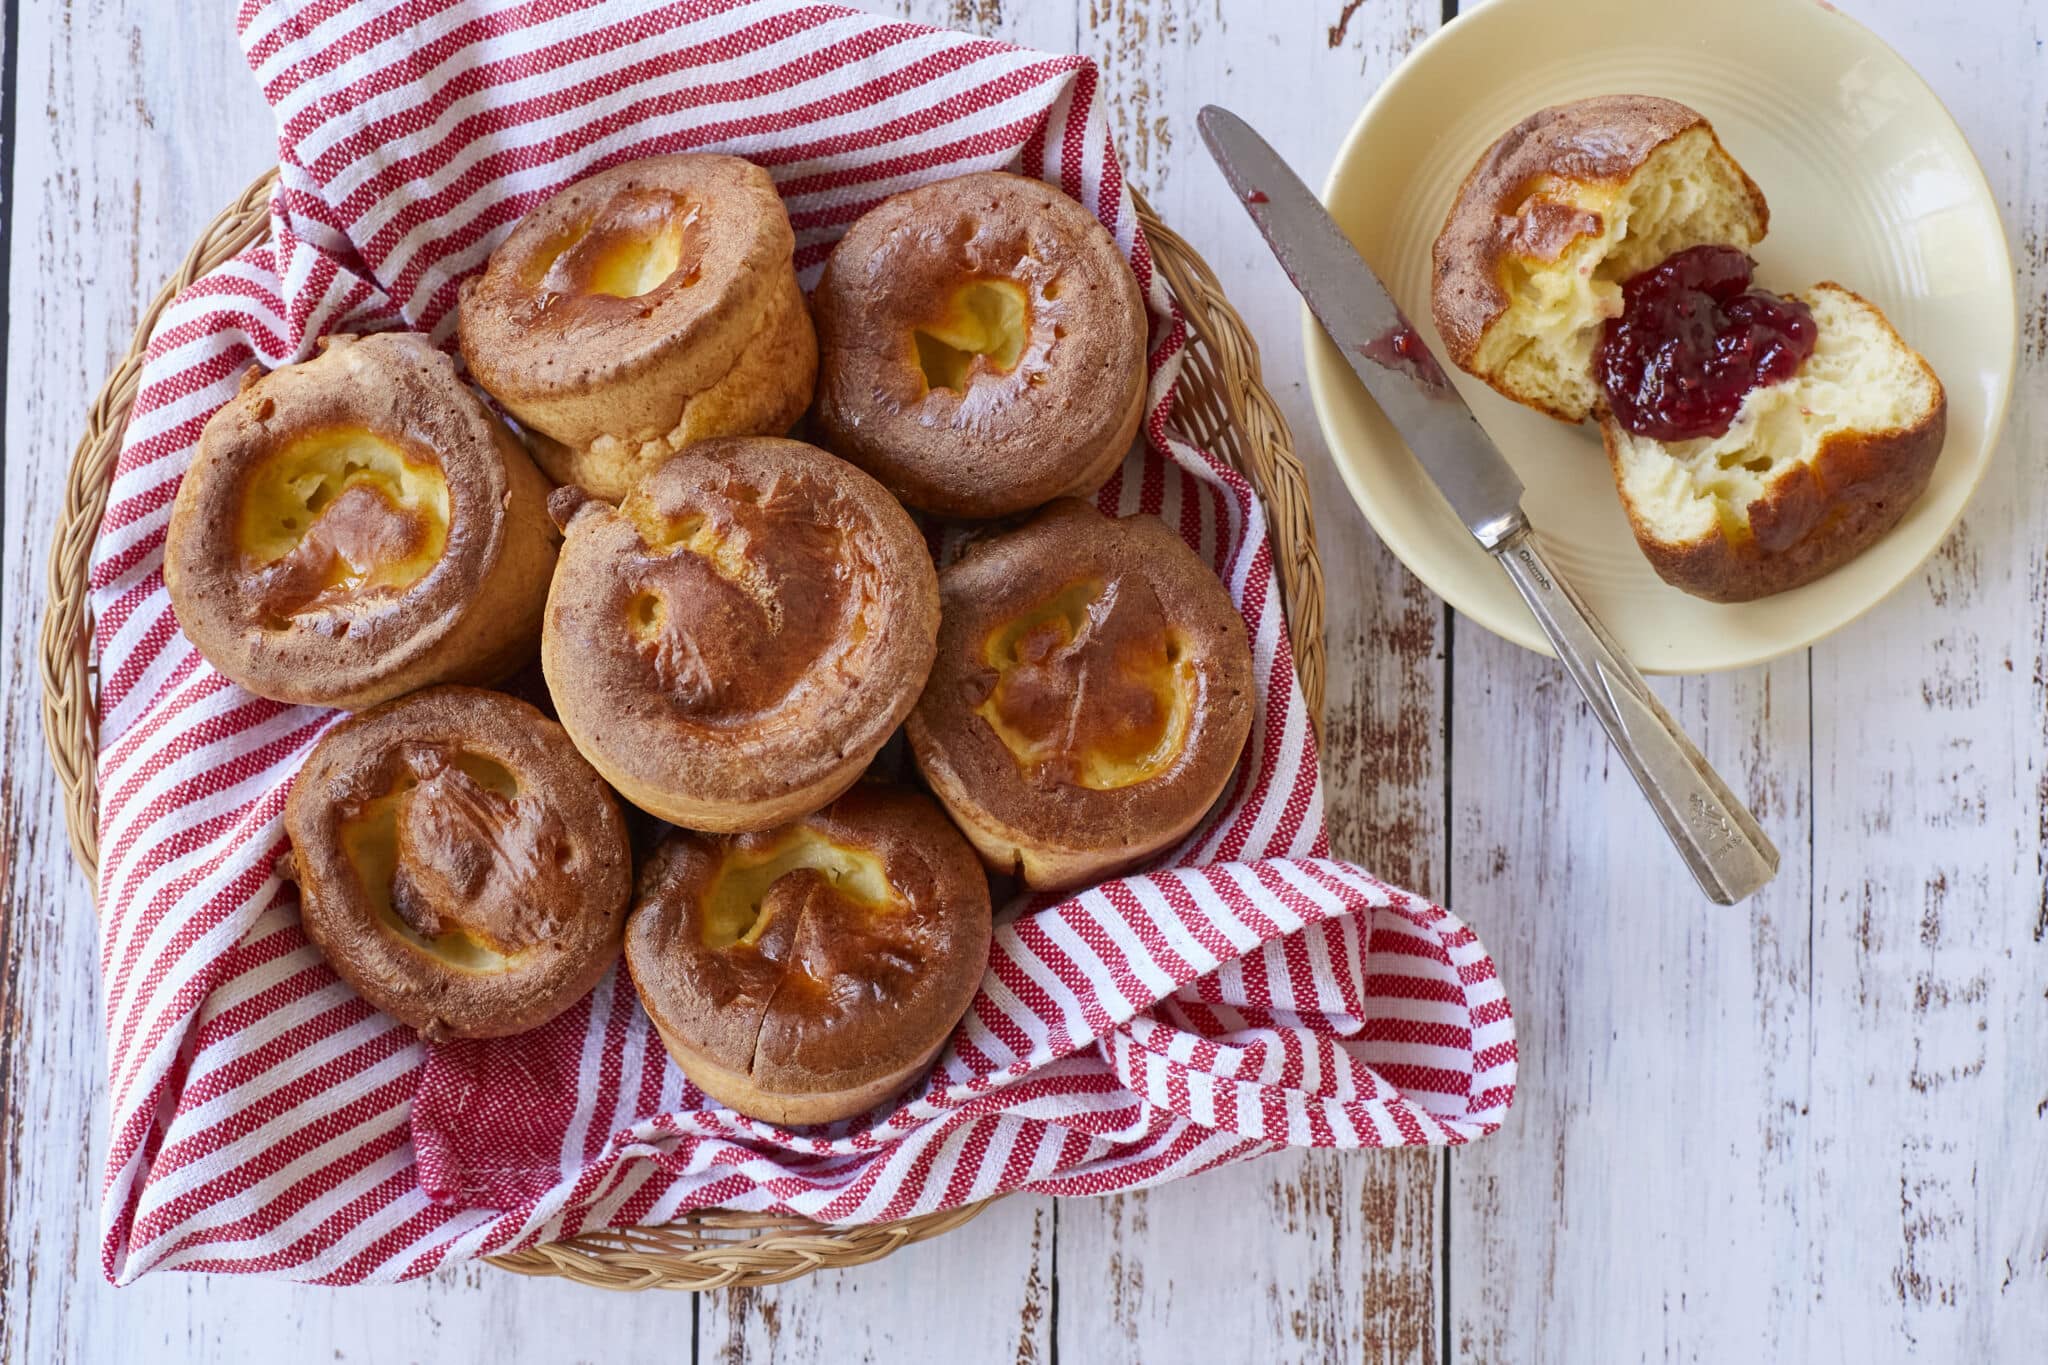 A basket of golden, light and fluffy Sourdough Popovers. One popover is sliced open and served on a dessert plate with jam.